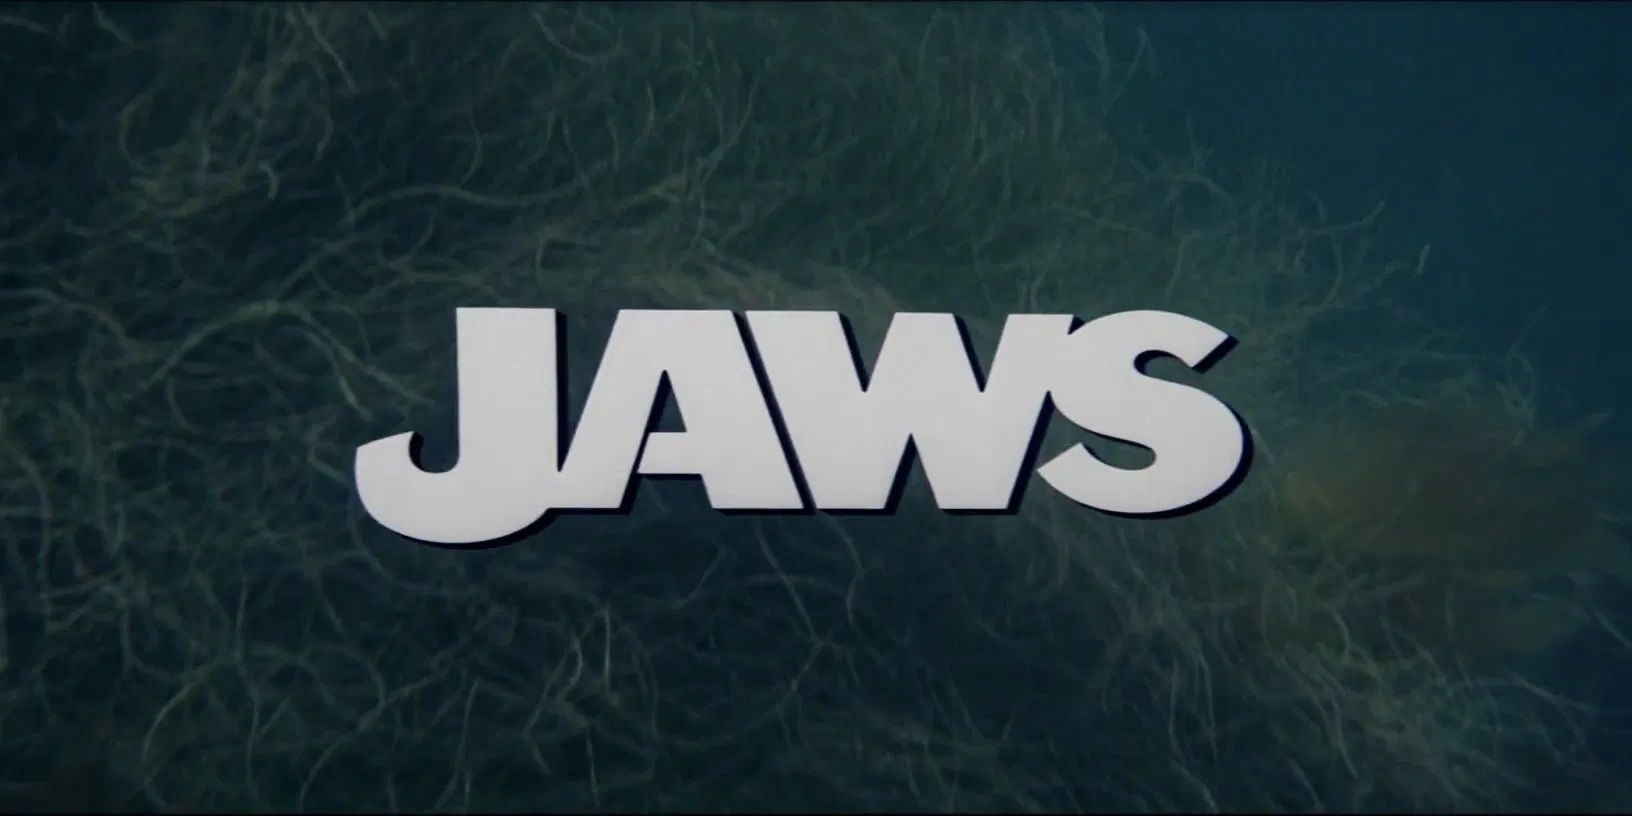 The opening titles of Jaws